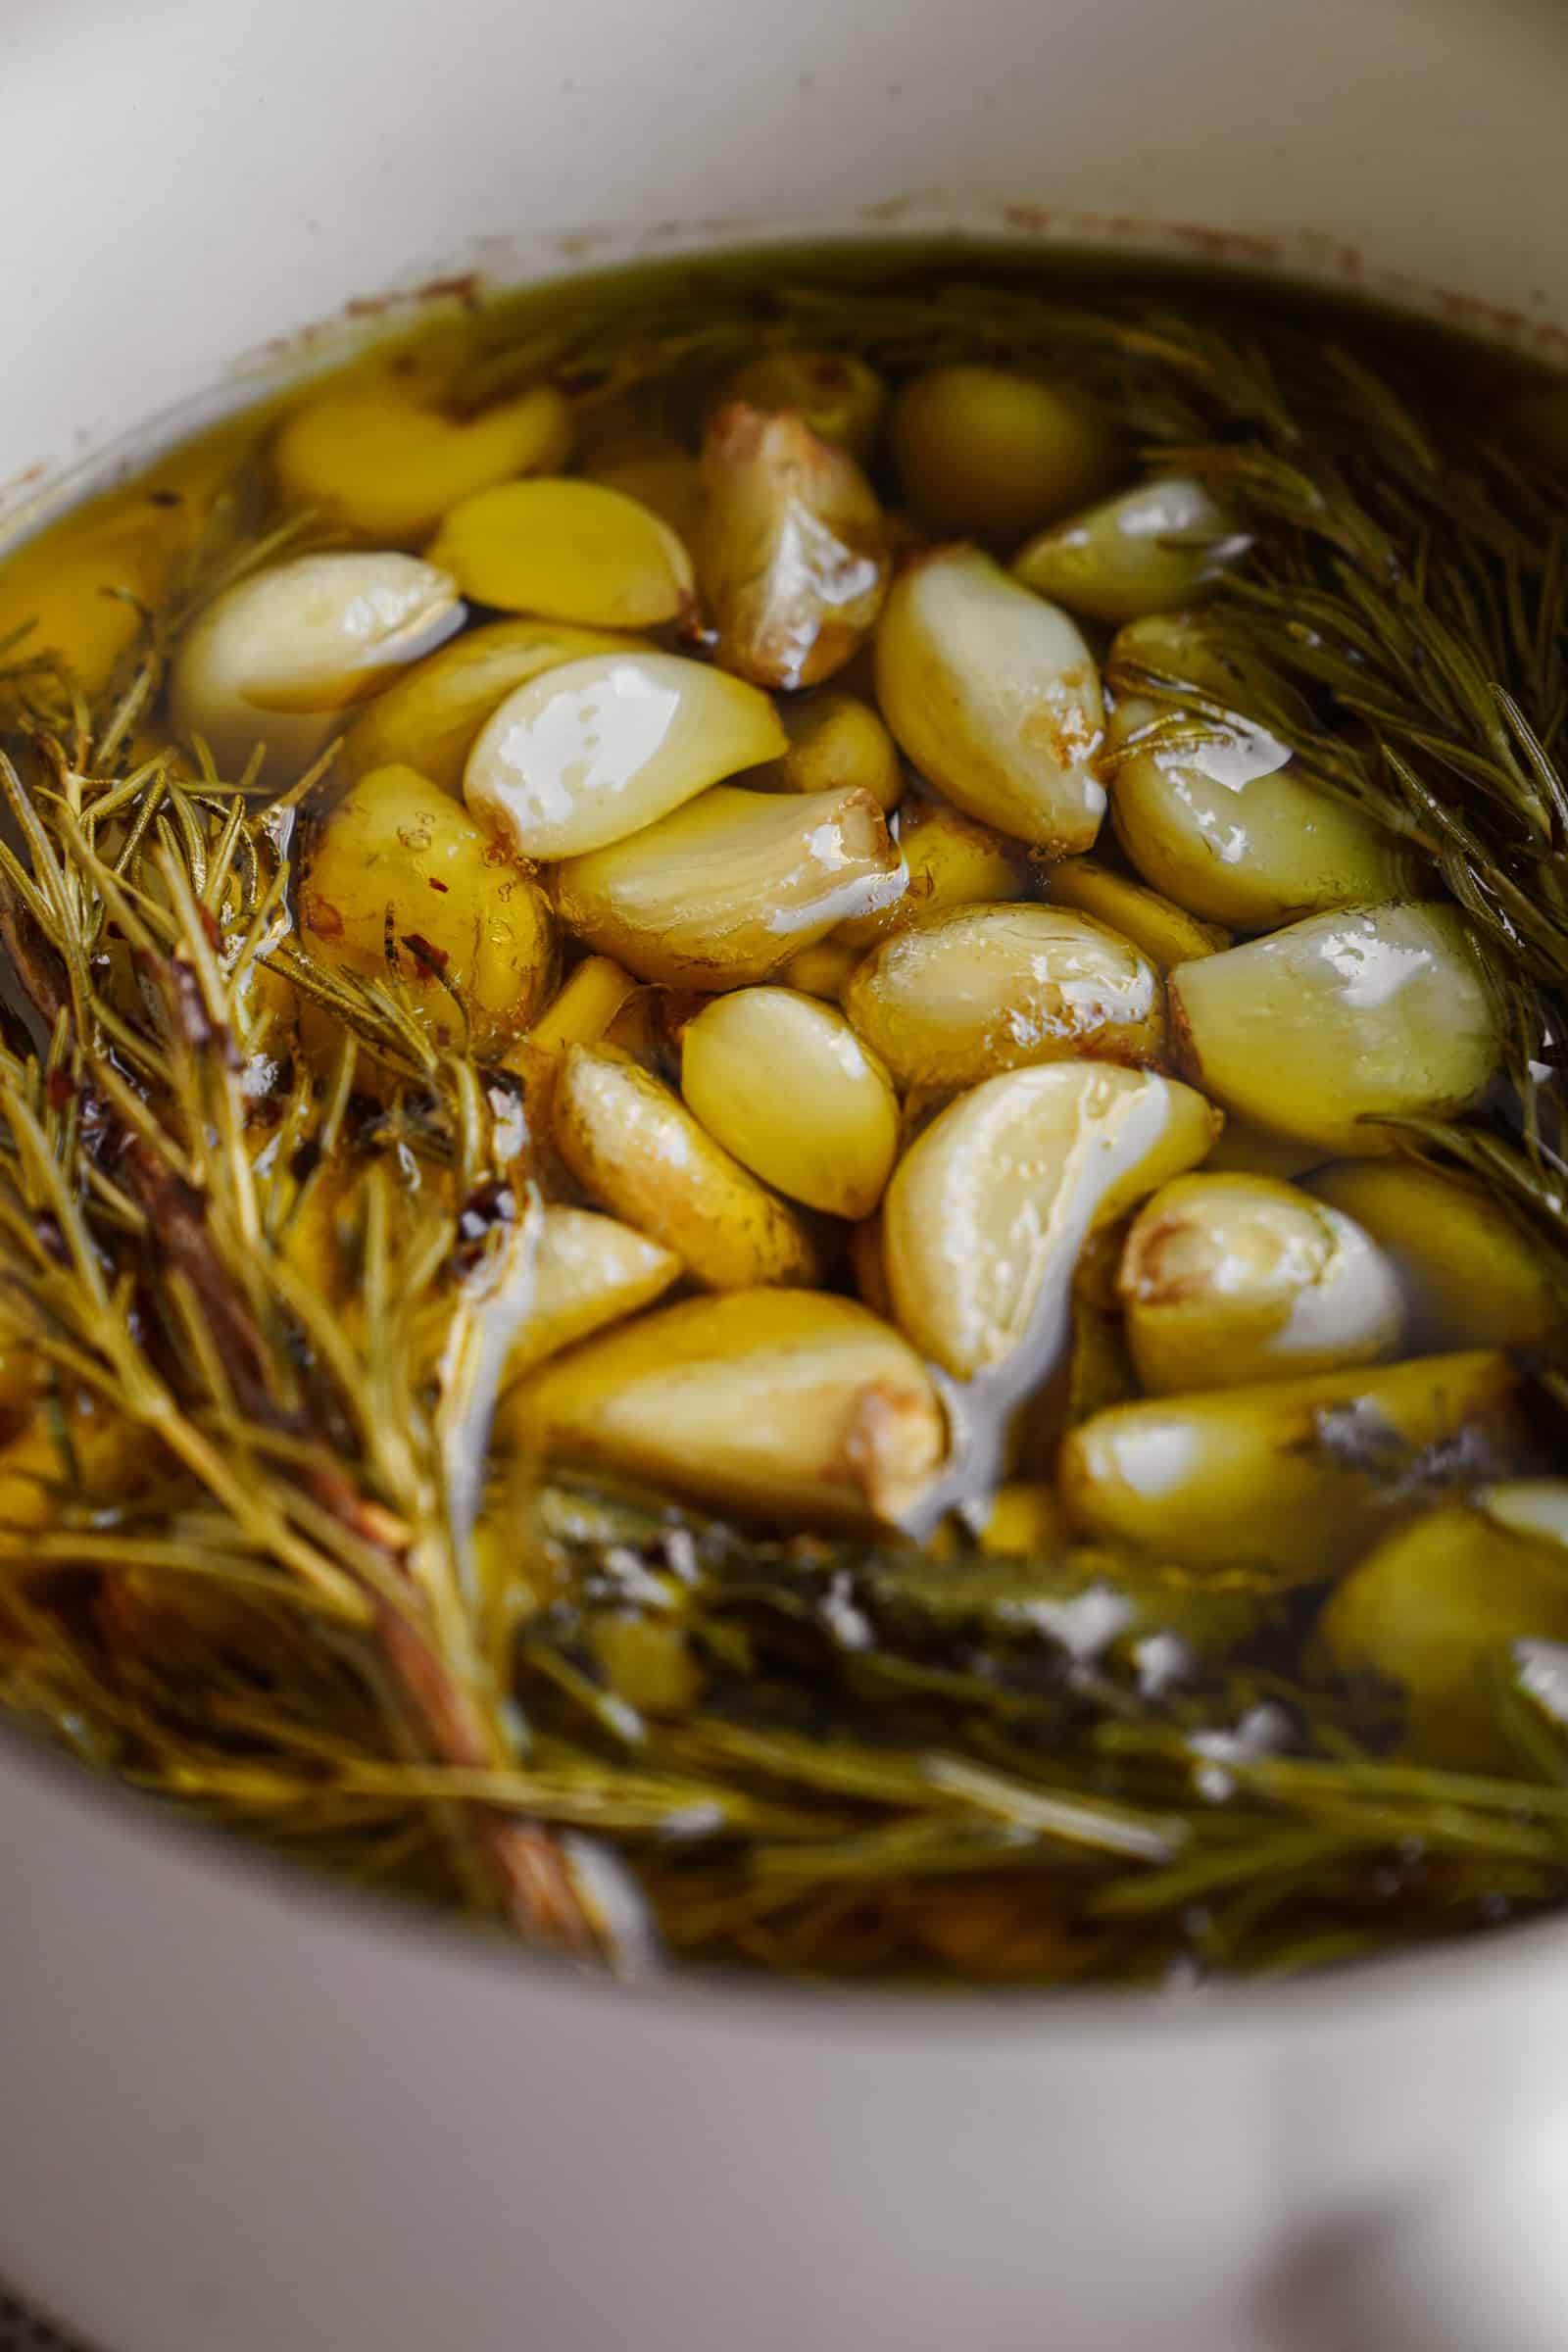 Finished garlic confit in pot